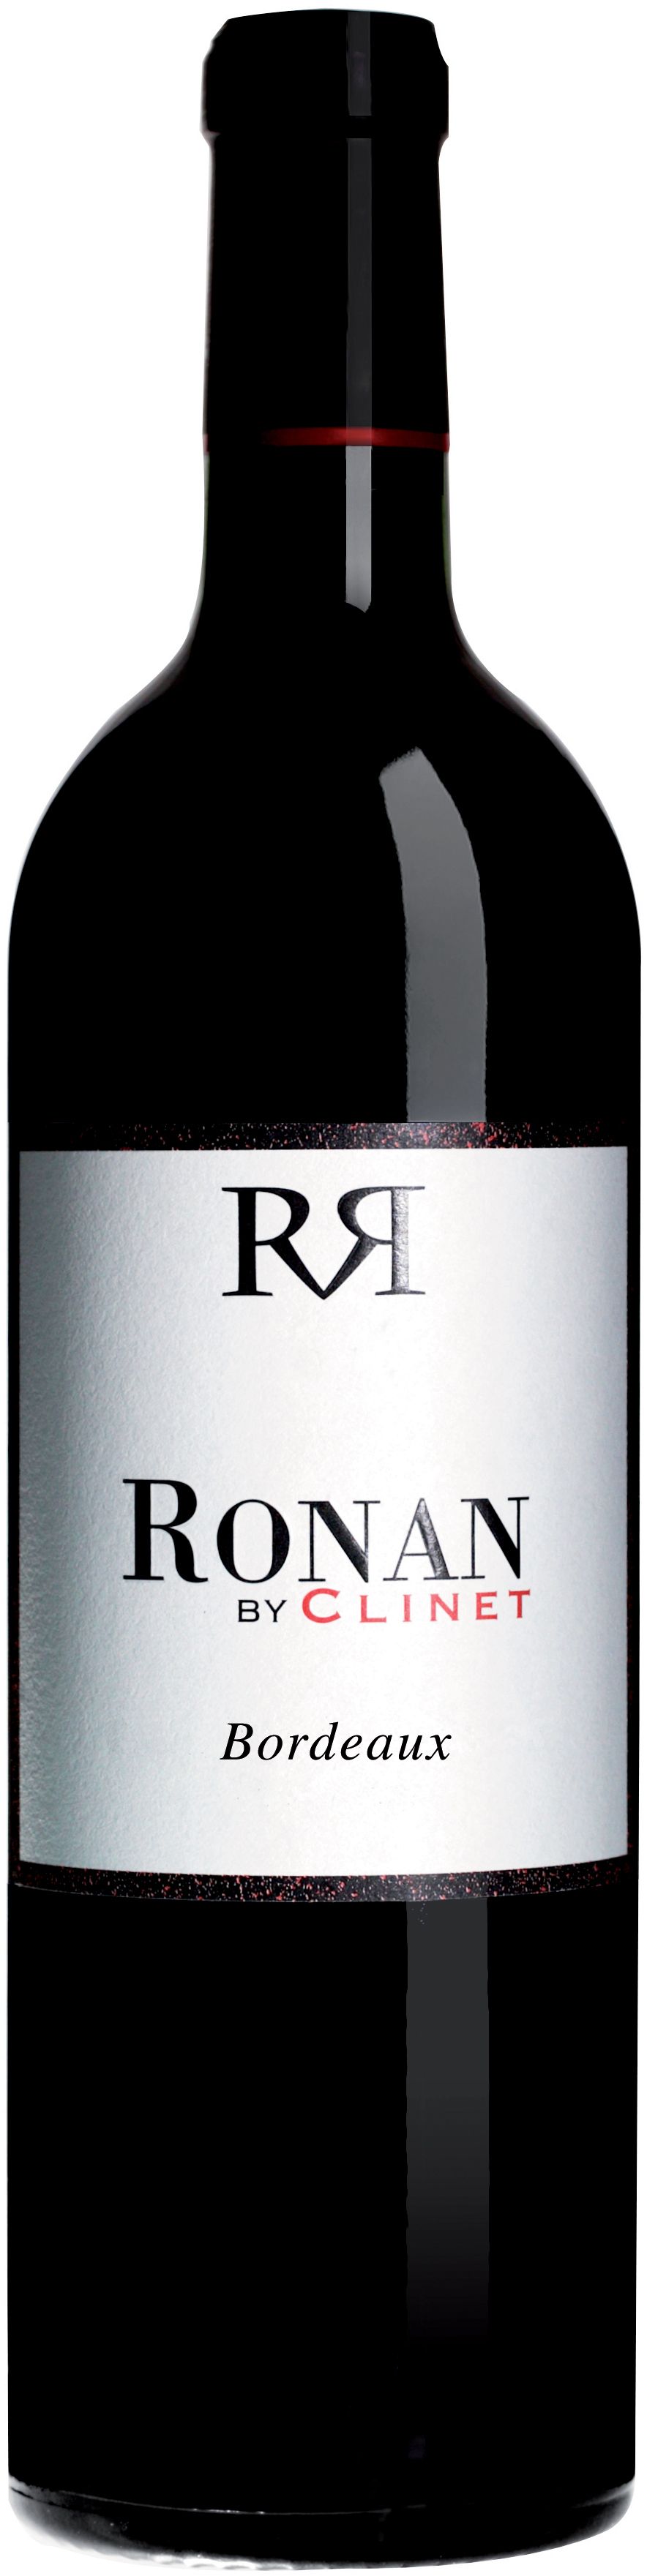 Chateau Clinet, Ronan By Clinet Rouge, 2012